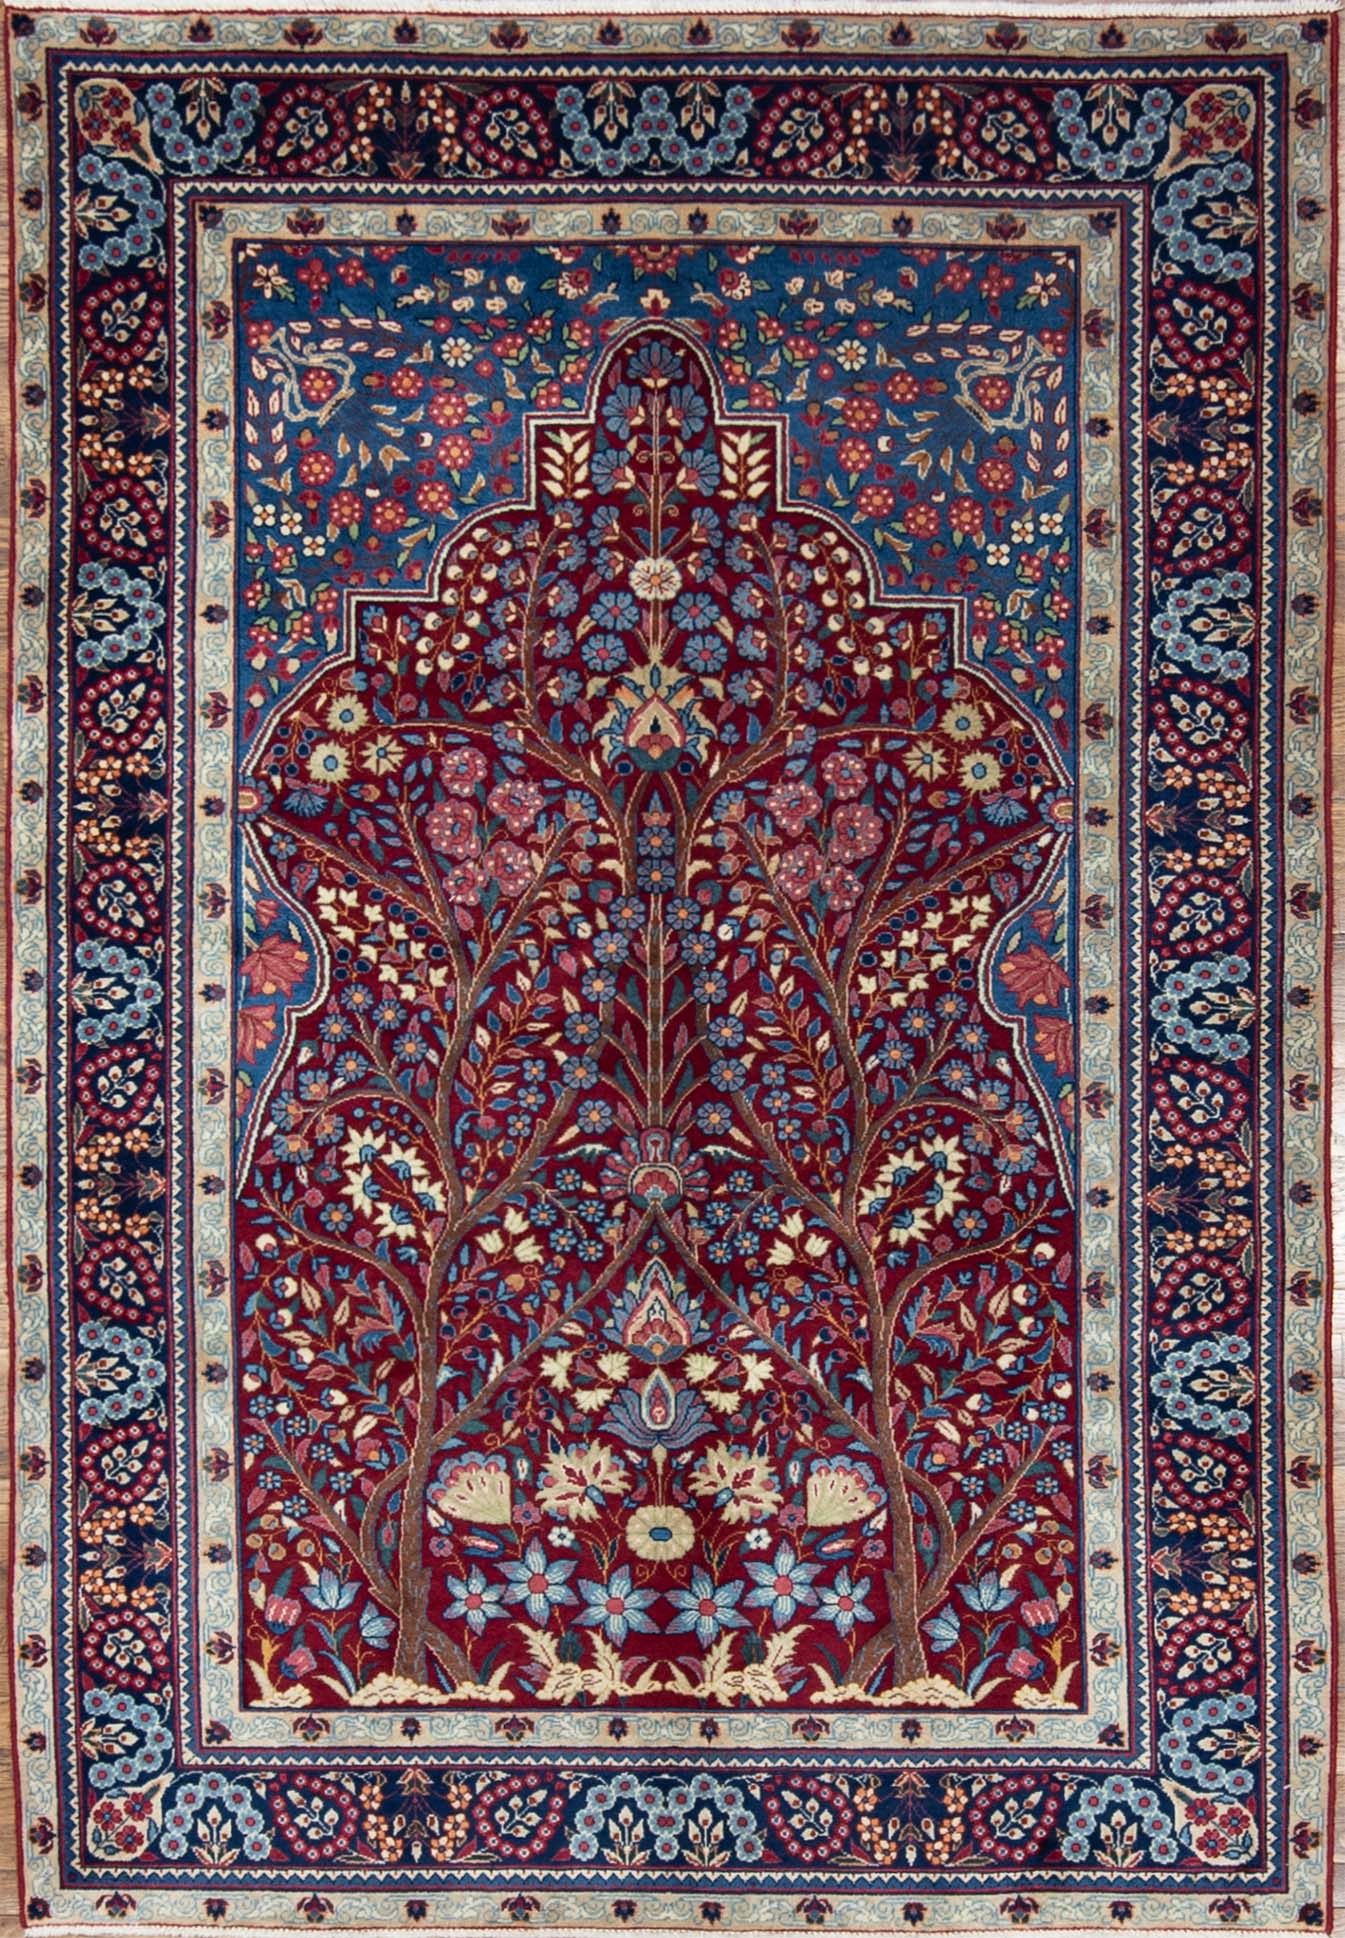 Area rug 5x8, handmade Persian Yazd vintage area rug with tree of life design in red and blue colors. Size 5x8.6.